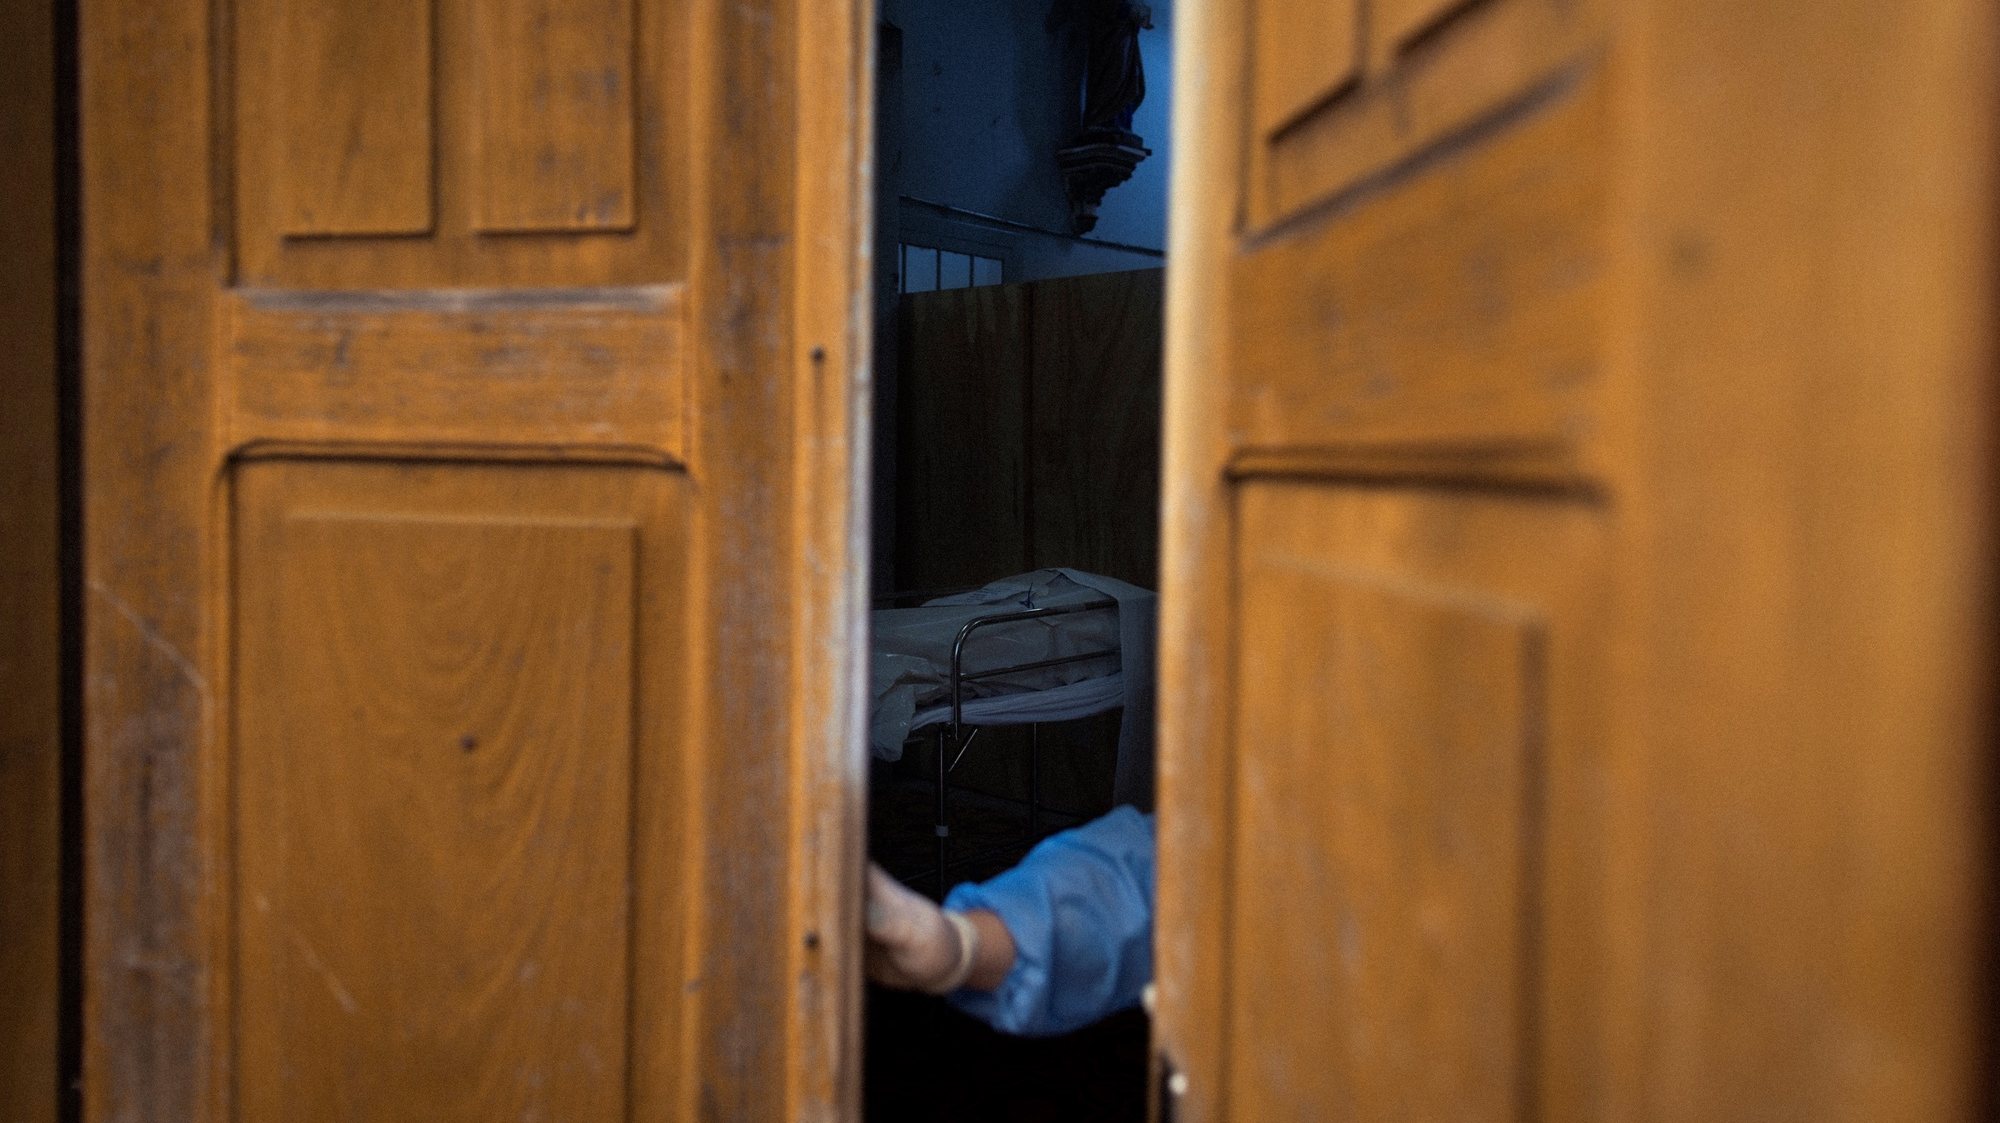 epa09094355 A nurse closes the door of a makeshift morgue in the Centenario hospital church, in SÃ£o Leopoldo, Rio Grande do Sul, Brazil , 23 March 2021 (Issued 24 March 2021). The country will possibly reach the figure of 300,000 deaths on 24 March from causes related to the coronavirus. SÃ£o Leopoldo, a city in the Porto Alegre metropolitan region, has just over 230,000 inhabitants and a single municipal hospital, with 18 beds to provide intensive care to COVID-19 patients.  EPA/Daniel Marenco